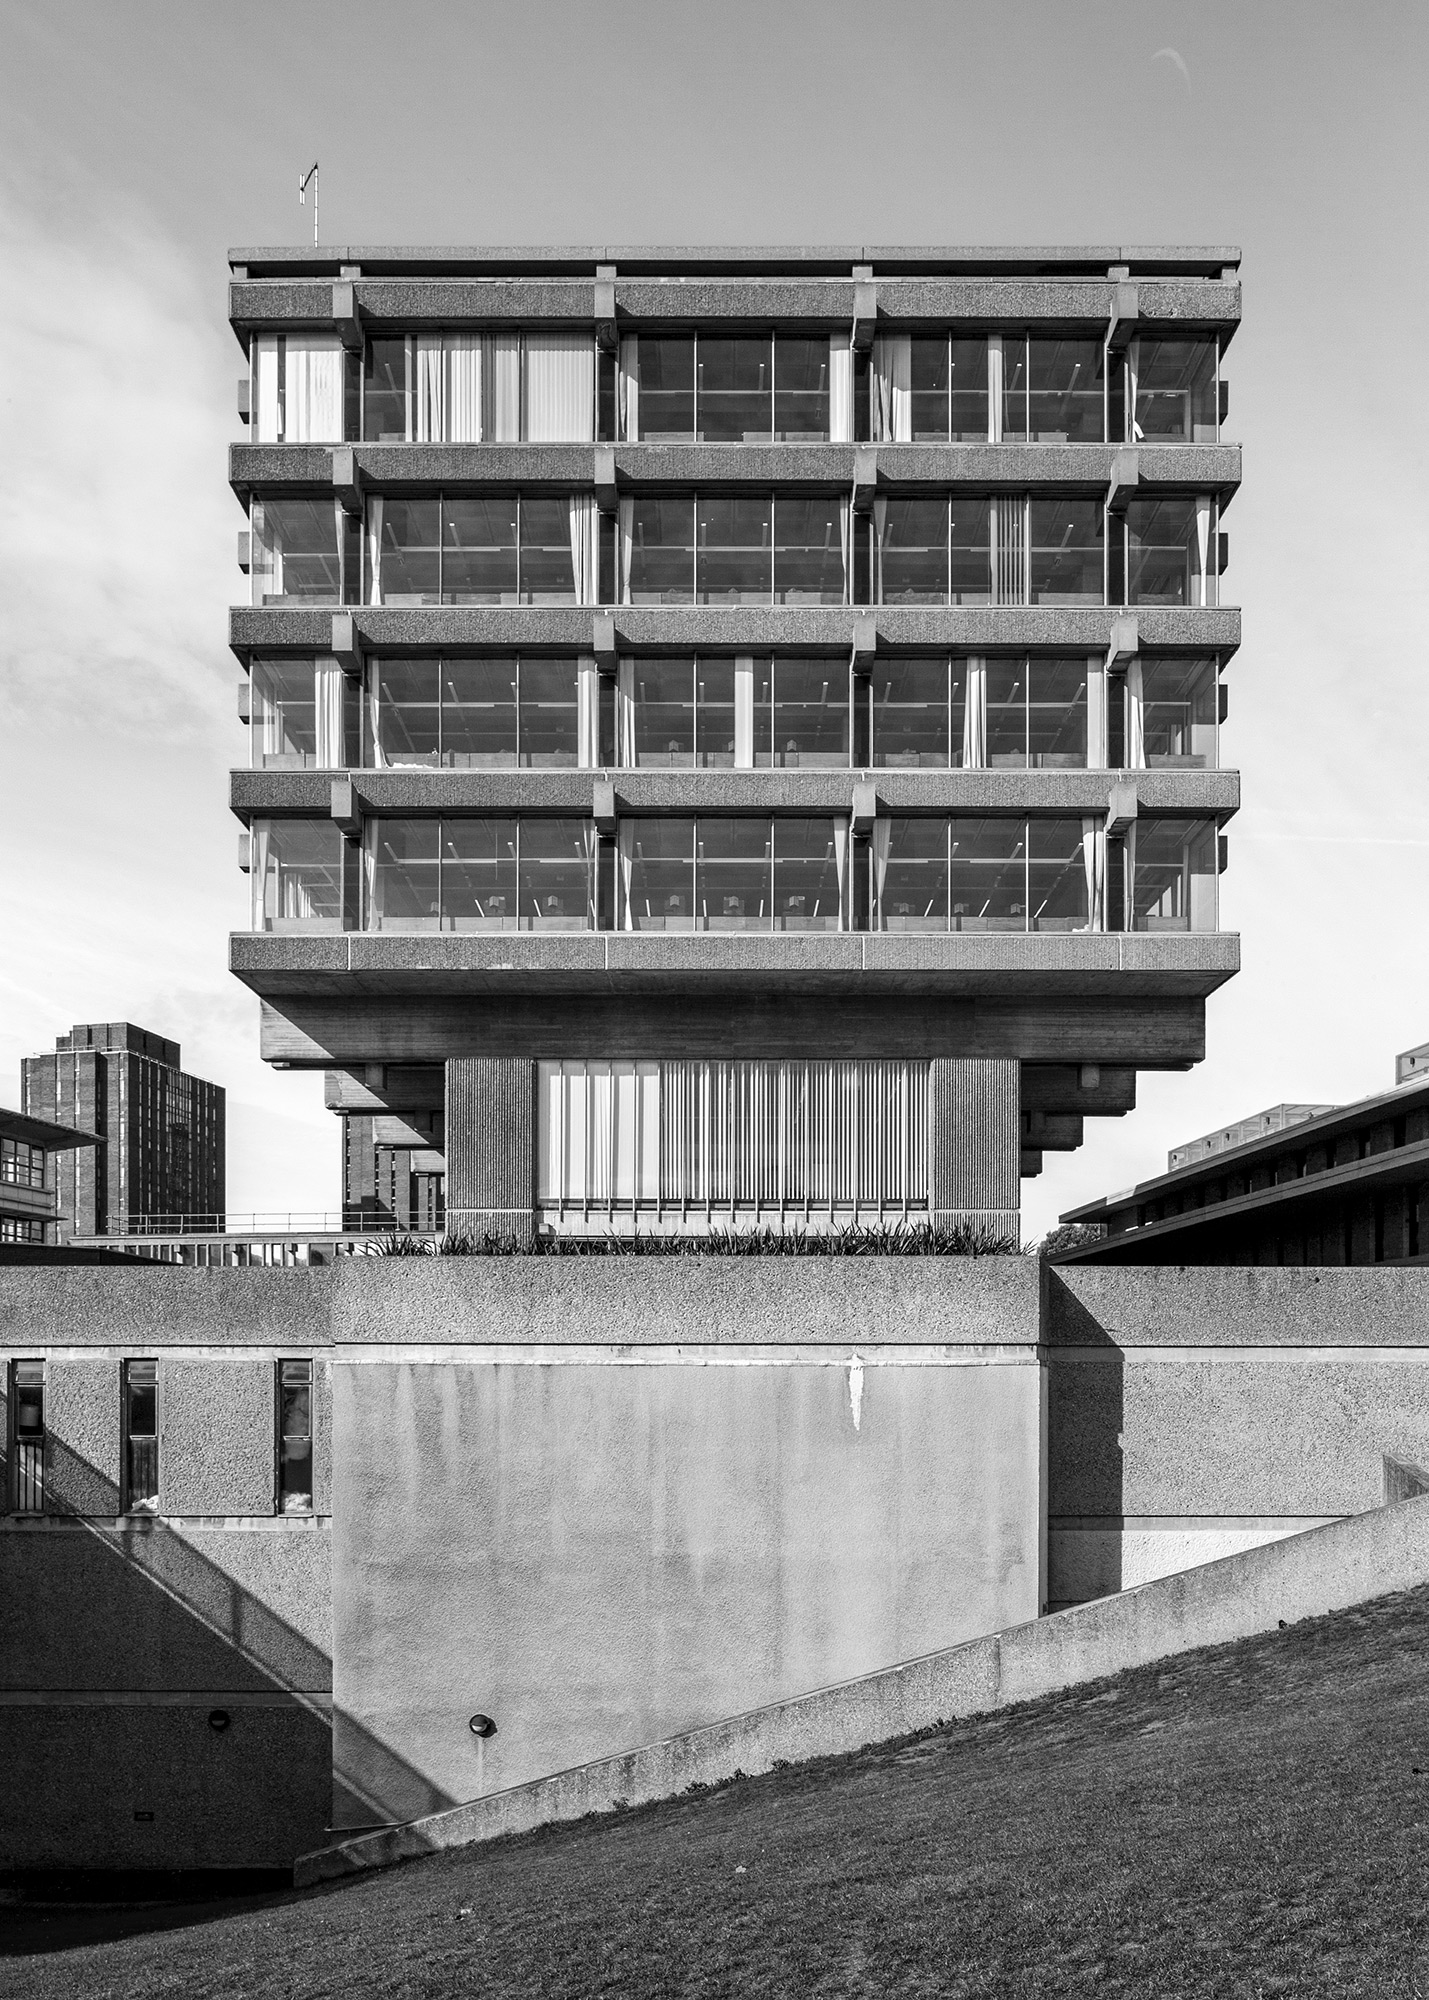 Example of a Brutalism Building